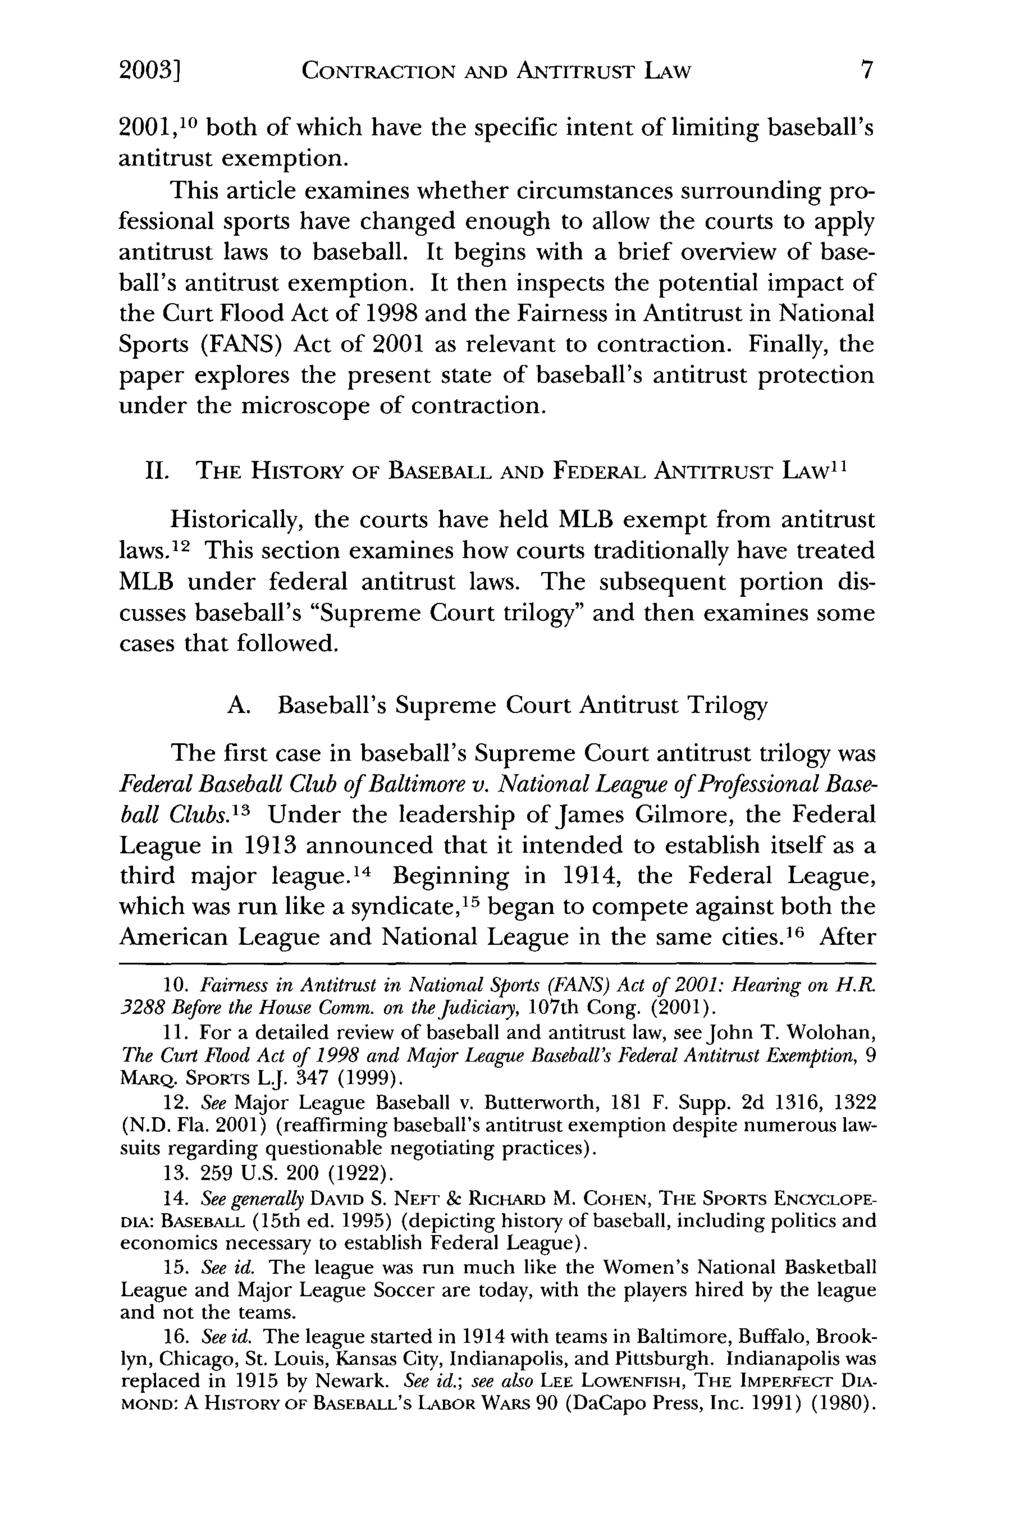 20031 Wolohan: Major League Baseball Contraction and Antitrust Law CONTRACTION AND ANTITRUST LAw 2001,10 both of which have the specific intent of limiting baseball's antitrust exemption.